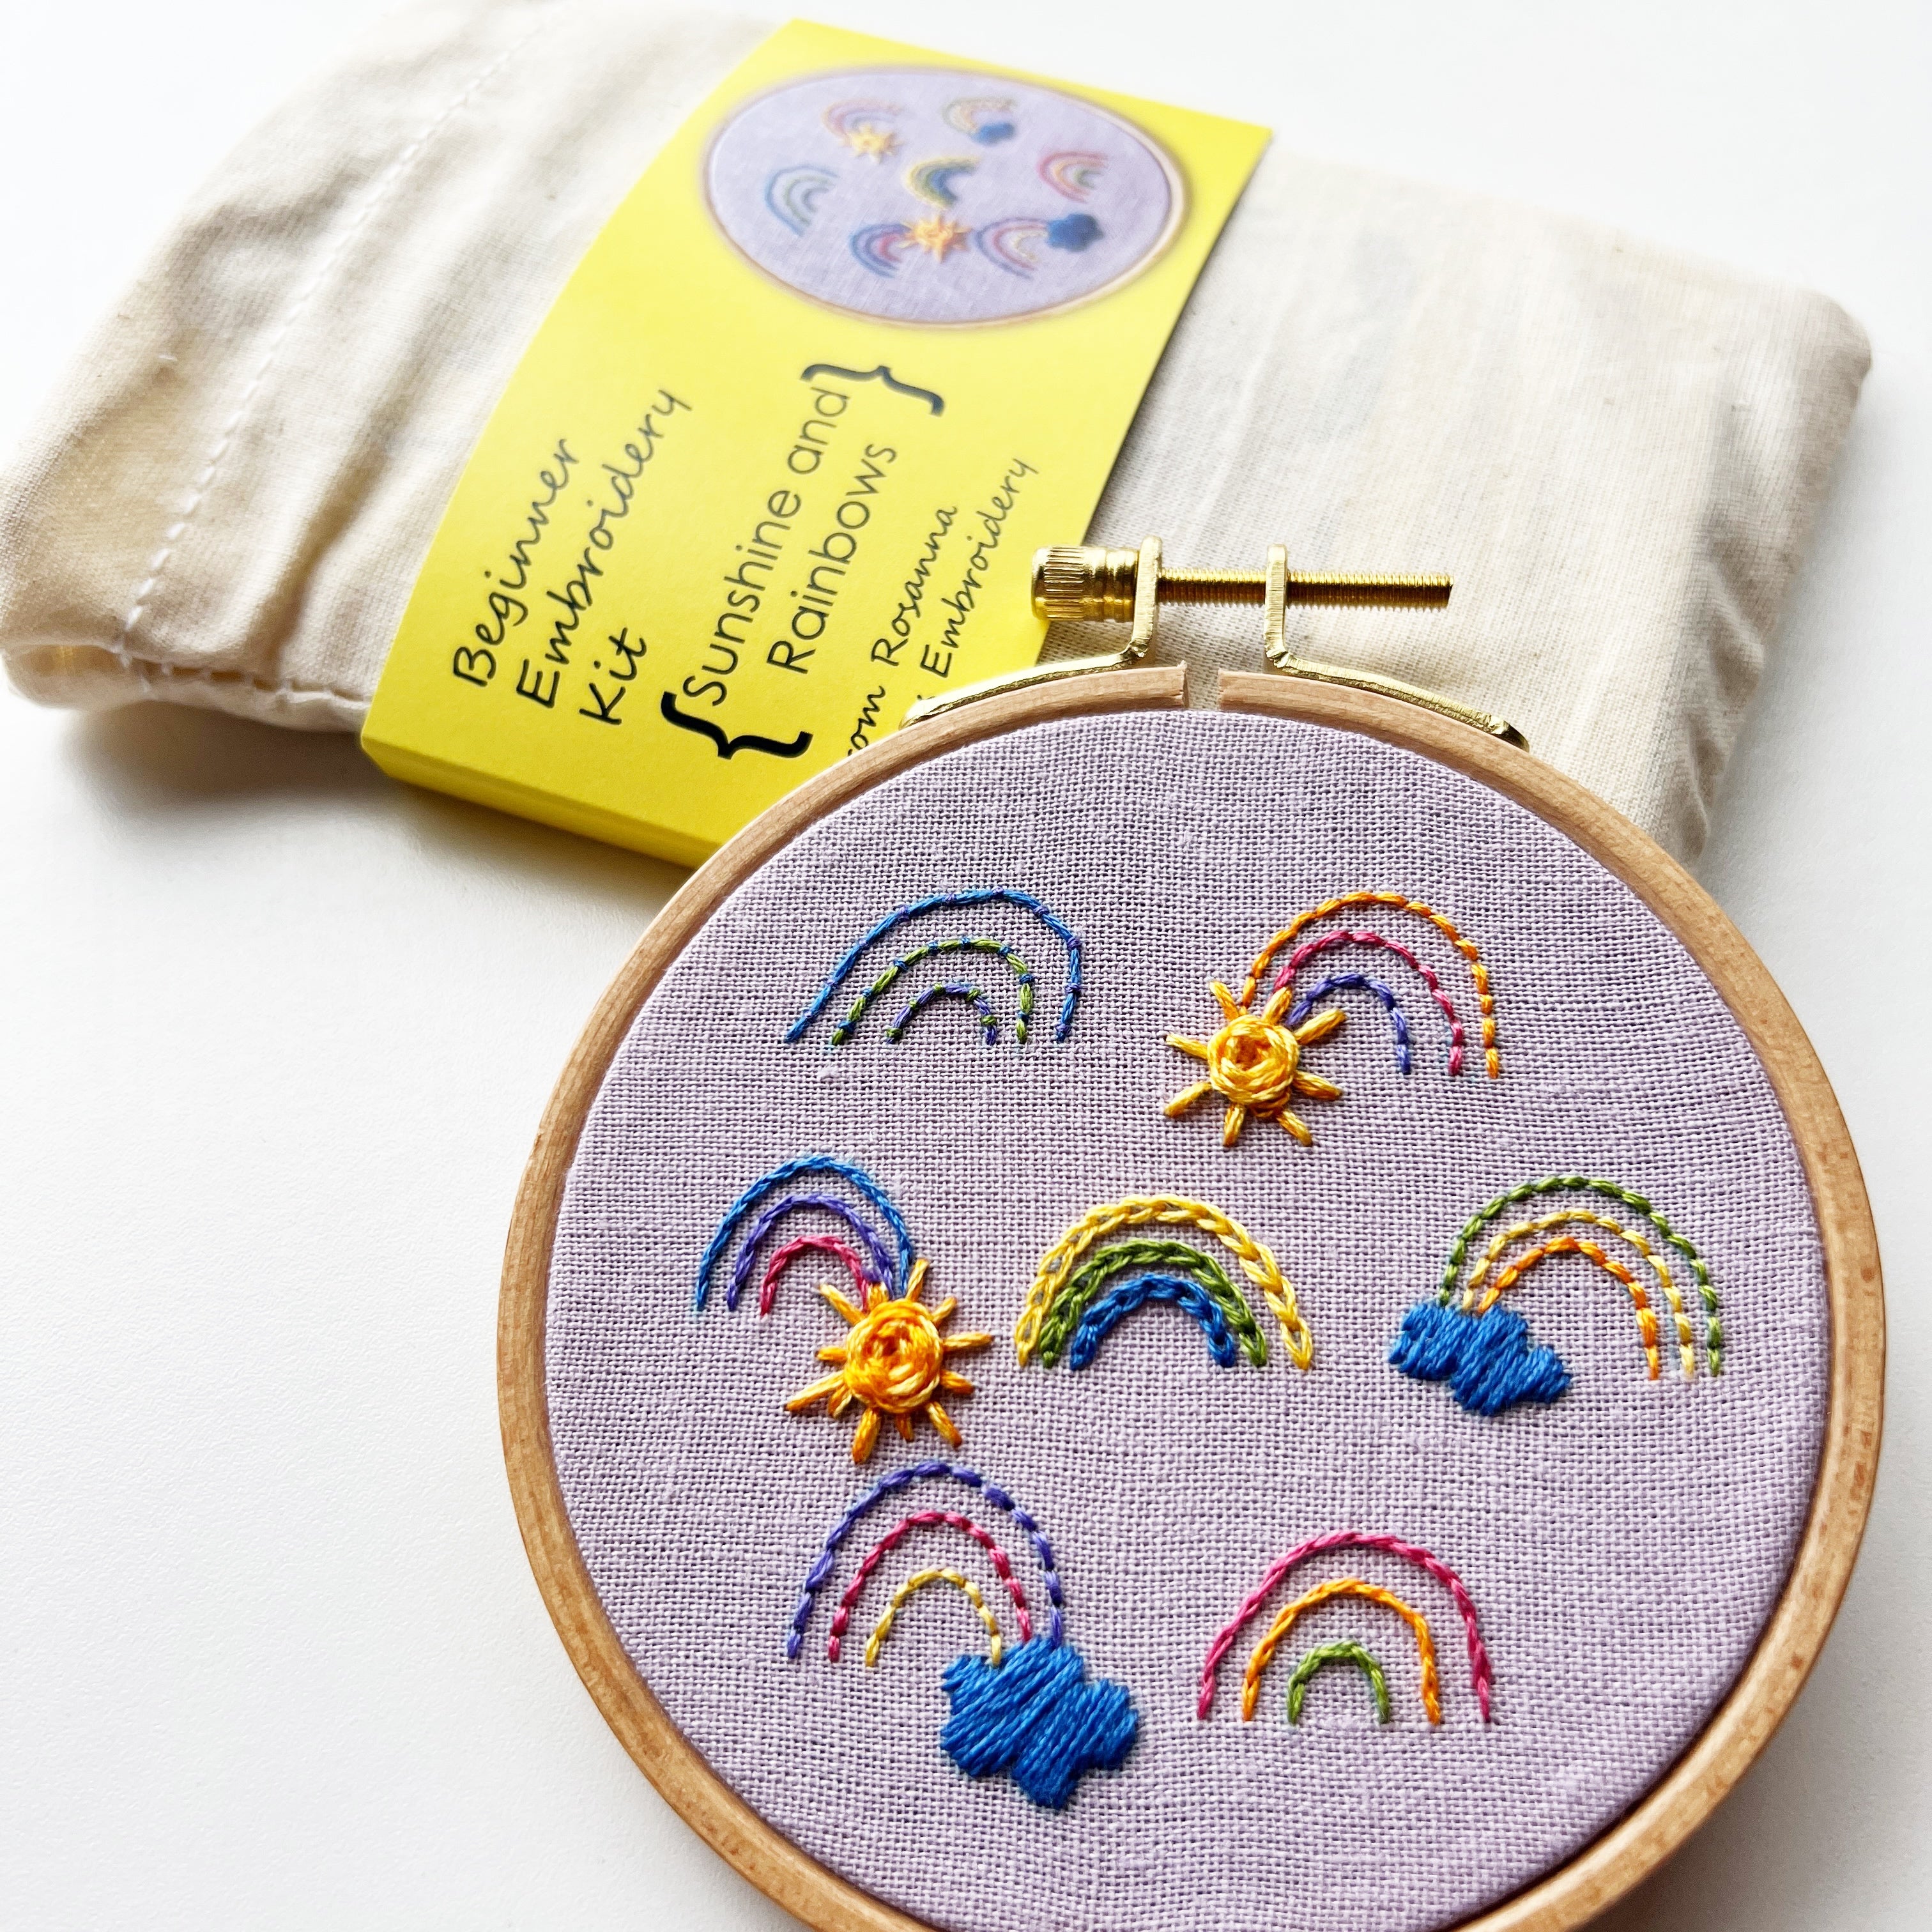 Sunshine and Rainbows Beginner Embroidery Kit – Rosanna Diggs Embroidery